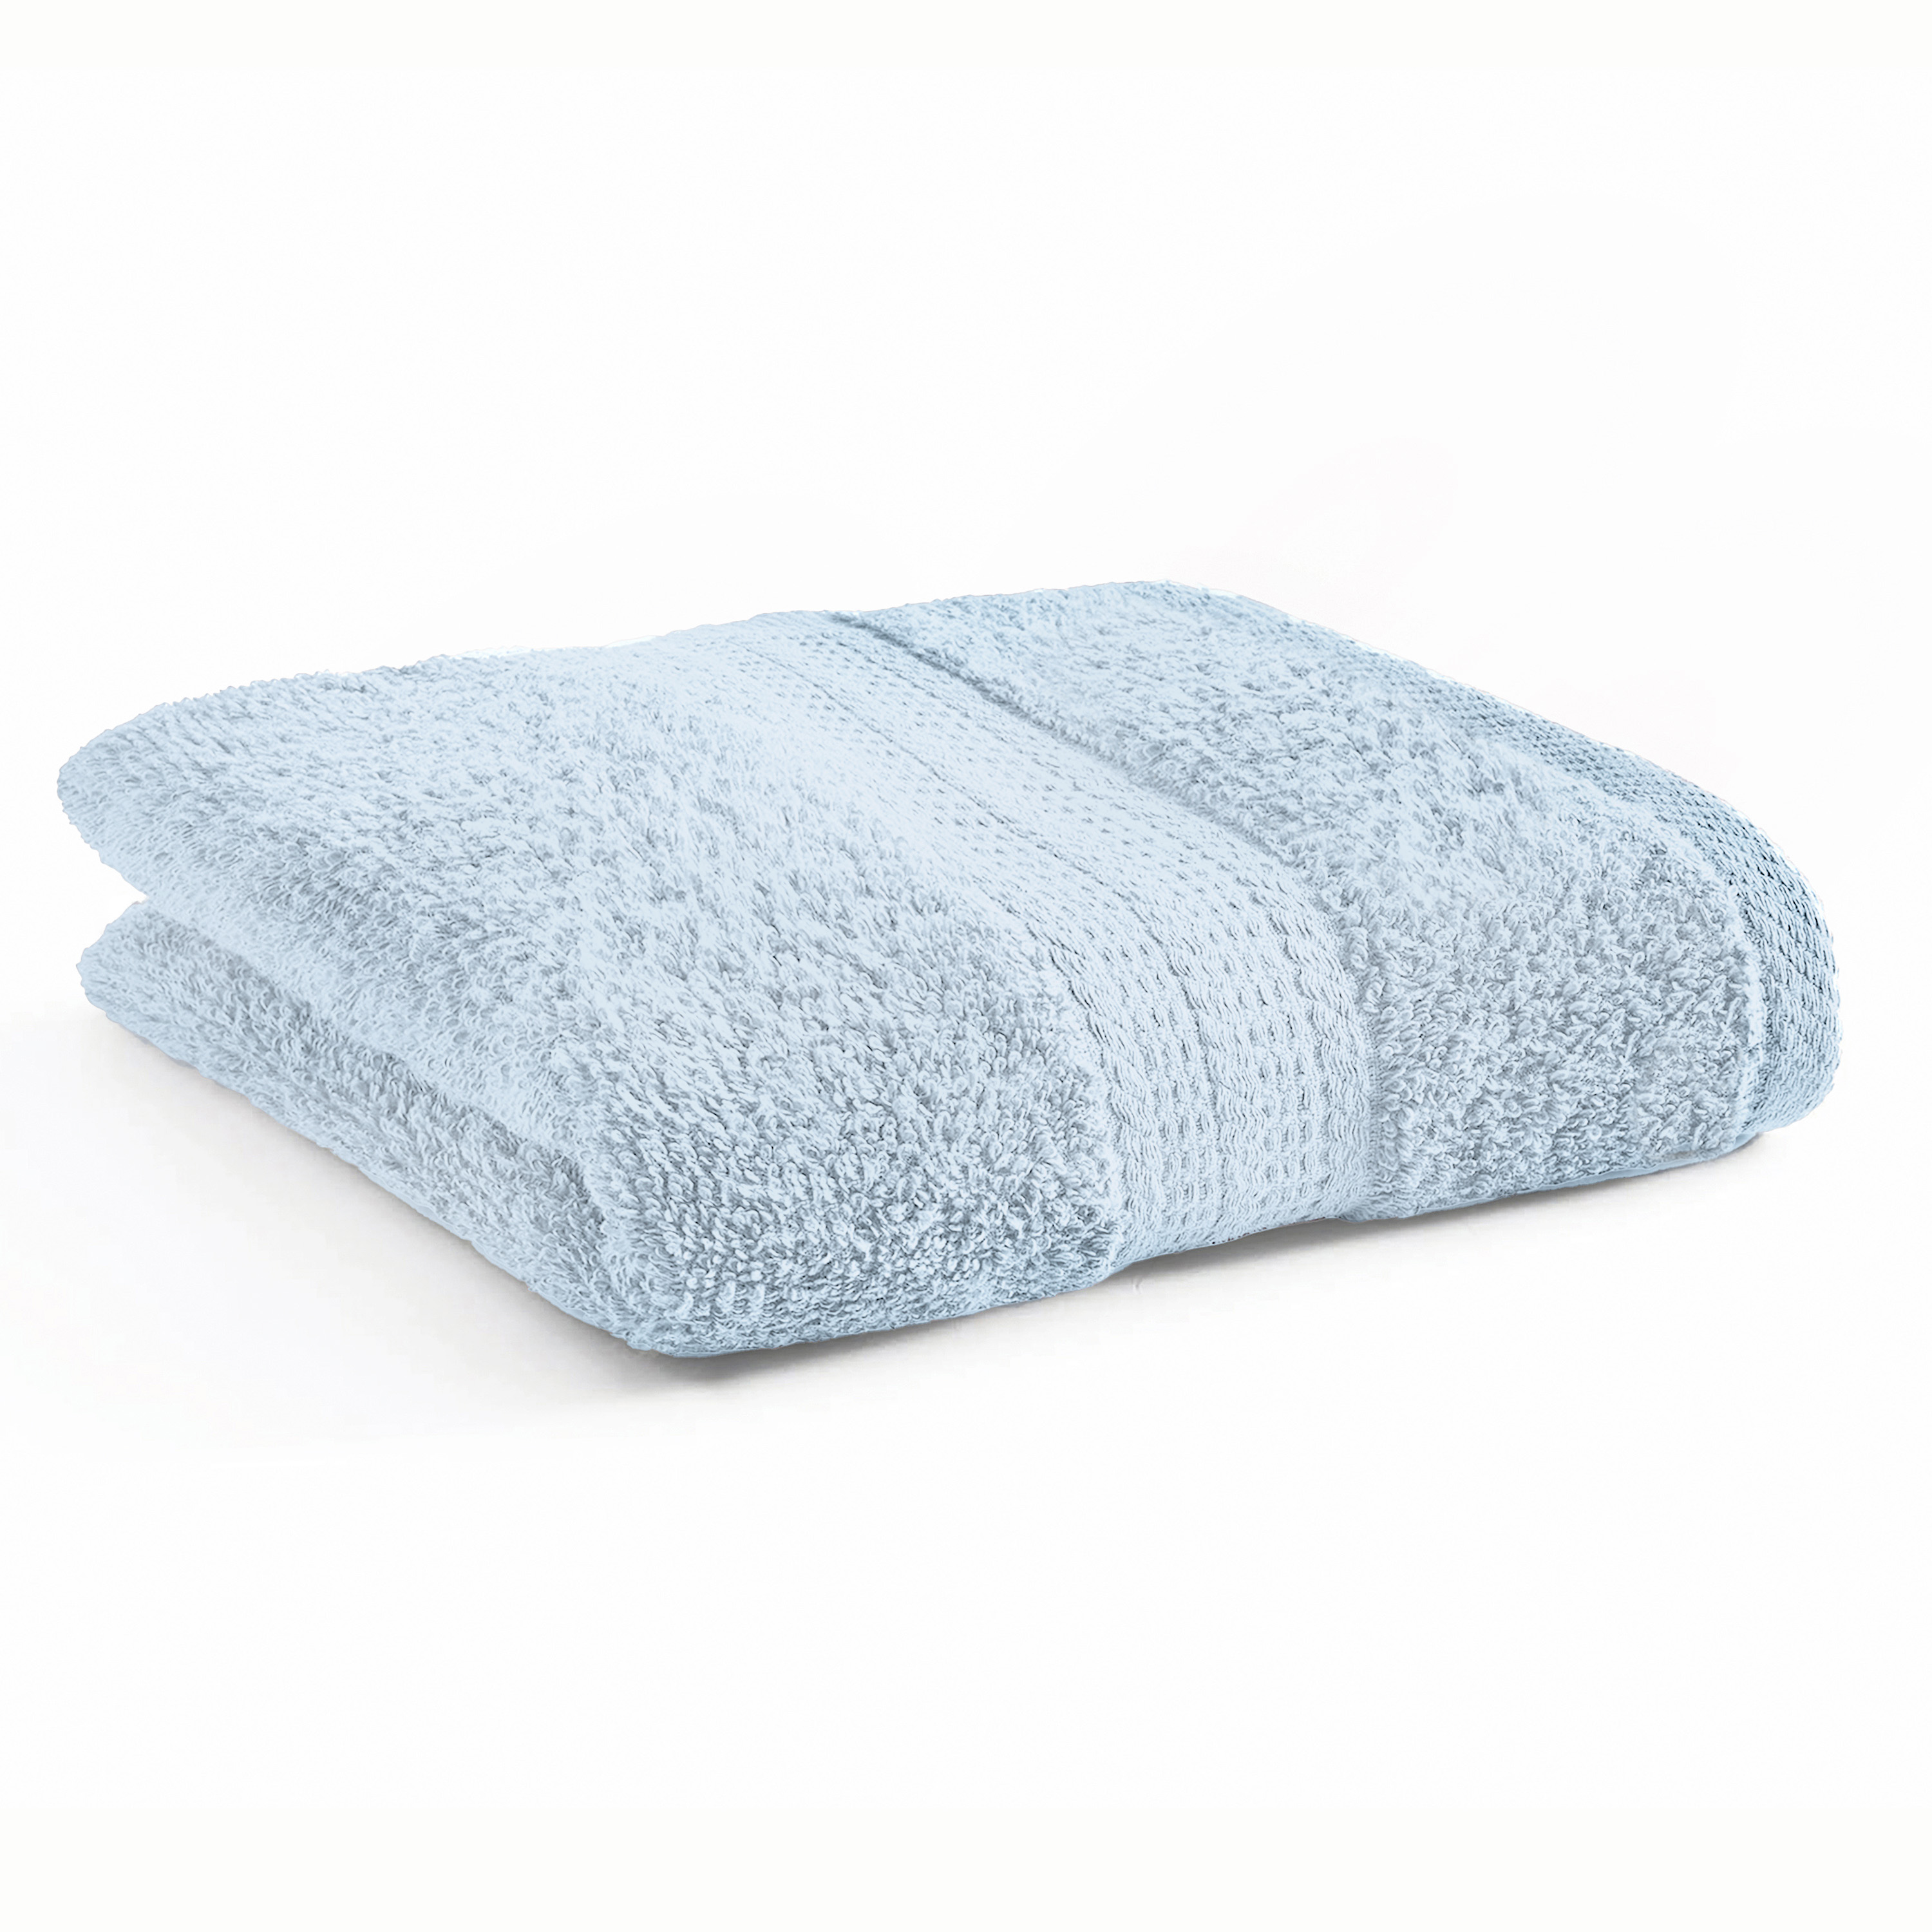 Better Homes & Gardens Hand Towel, Solid Light Blue - image 1 of 7